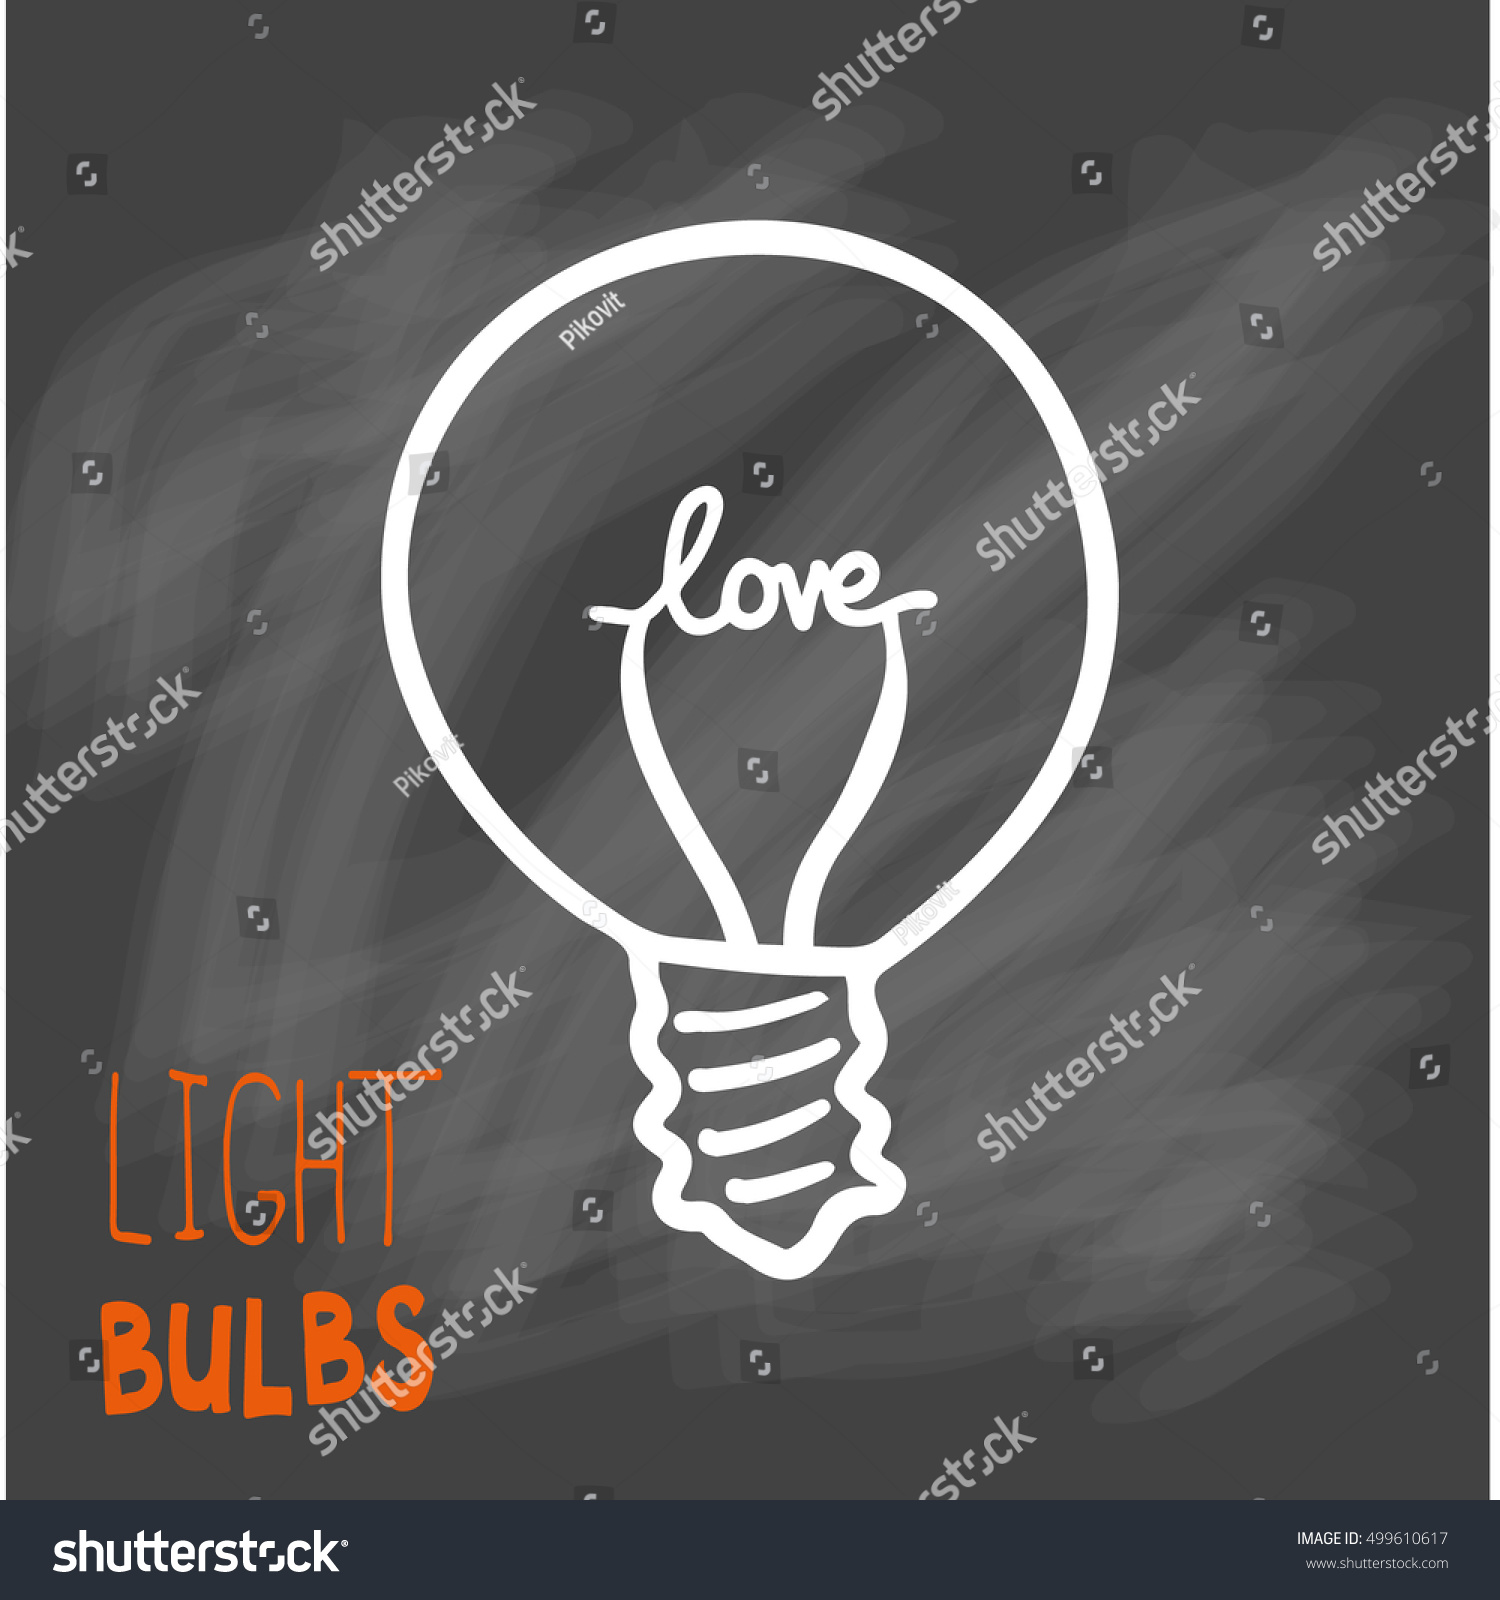 Light bulbs icon. Concept of big ideas inspiration, innovation, invention, effective thinking. CFL lamp.  Isolated. Vector illustration.  Idea symbol. Vector. sketch. Sign. On chalk background #499610617